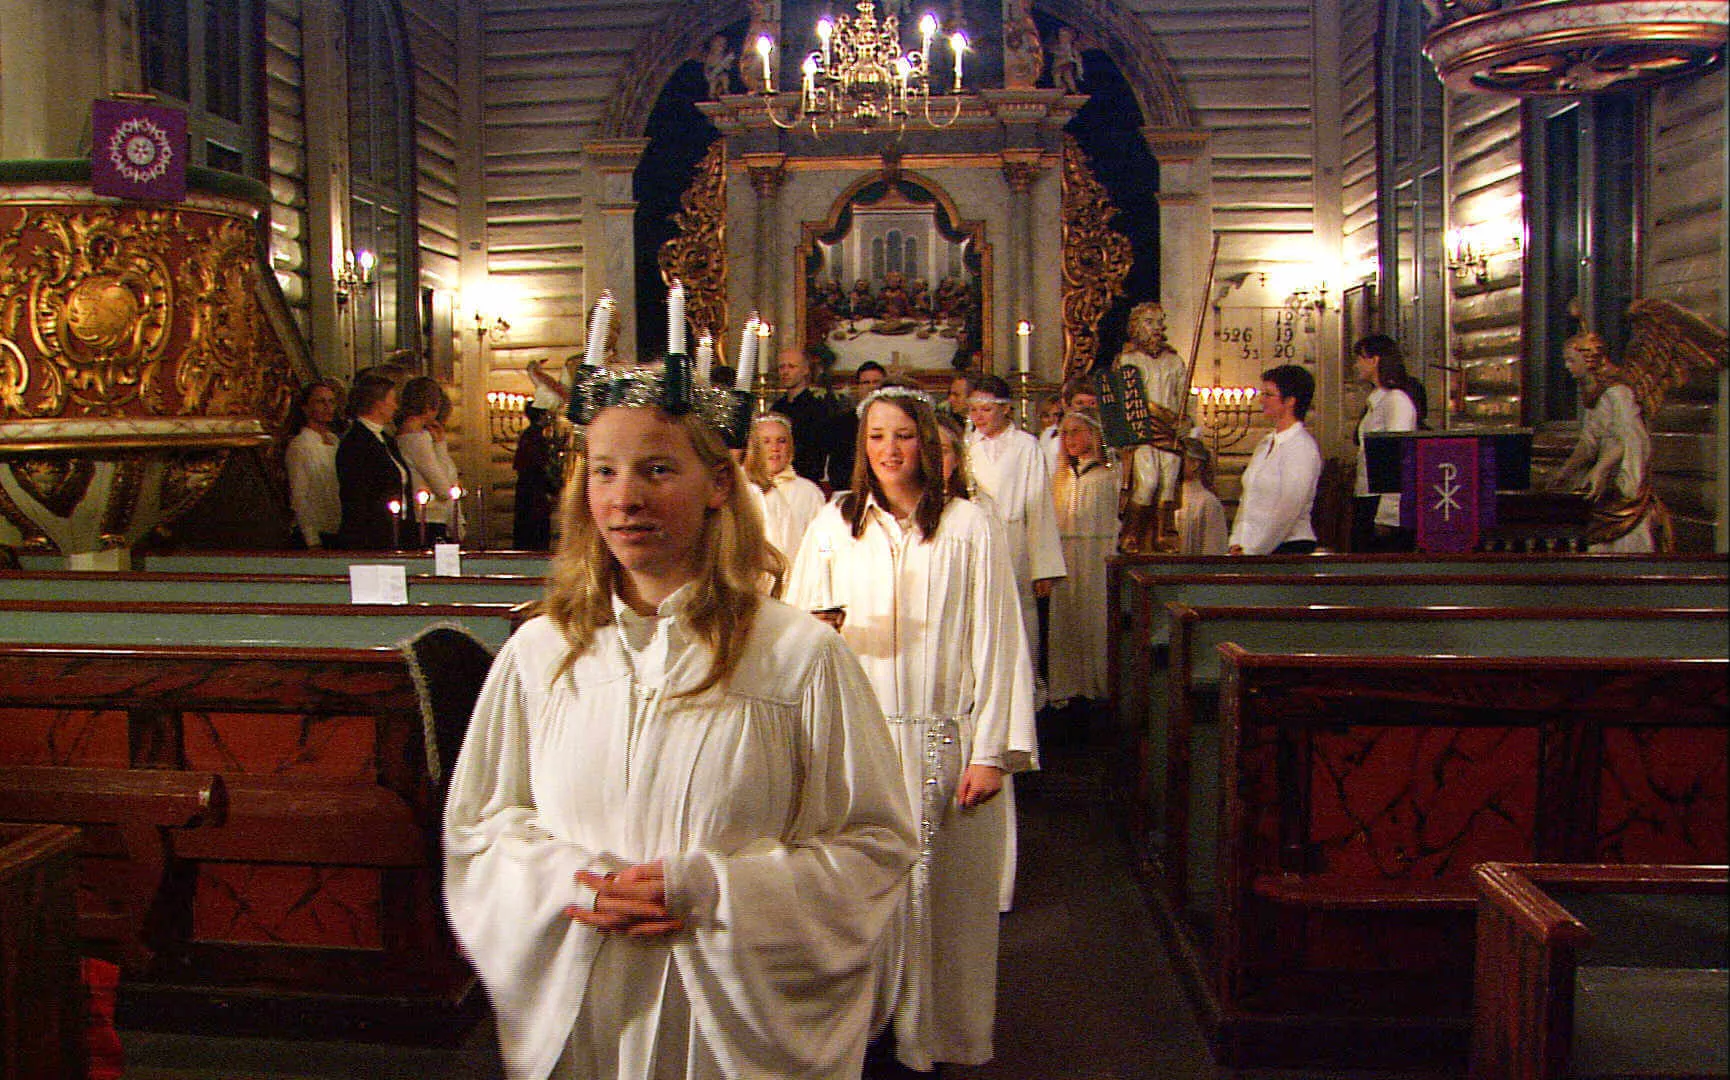 Norwegian girls celebrate the feast of Santa Lucia on December 13 with a candlelight procession